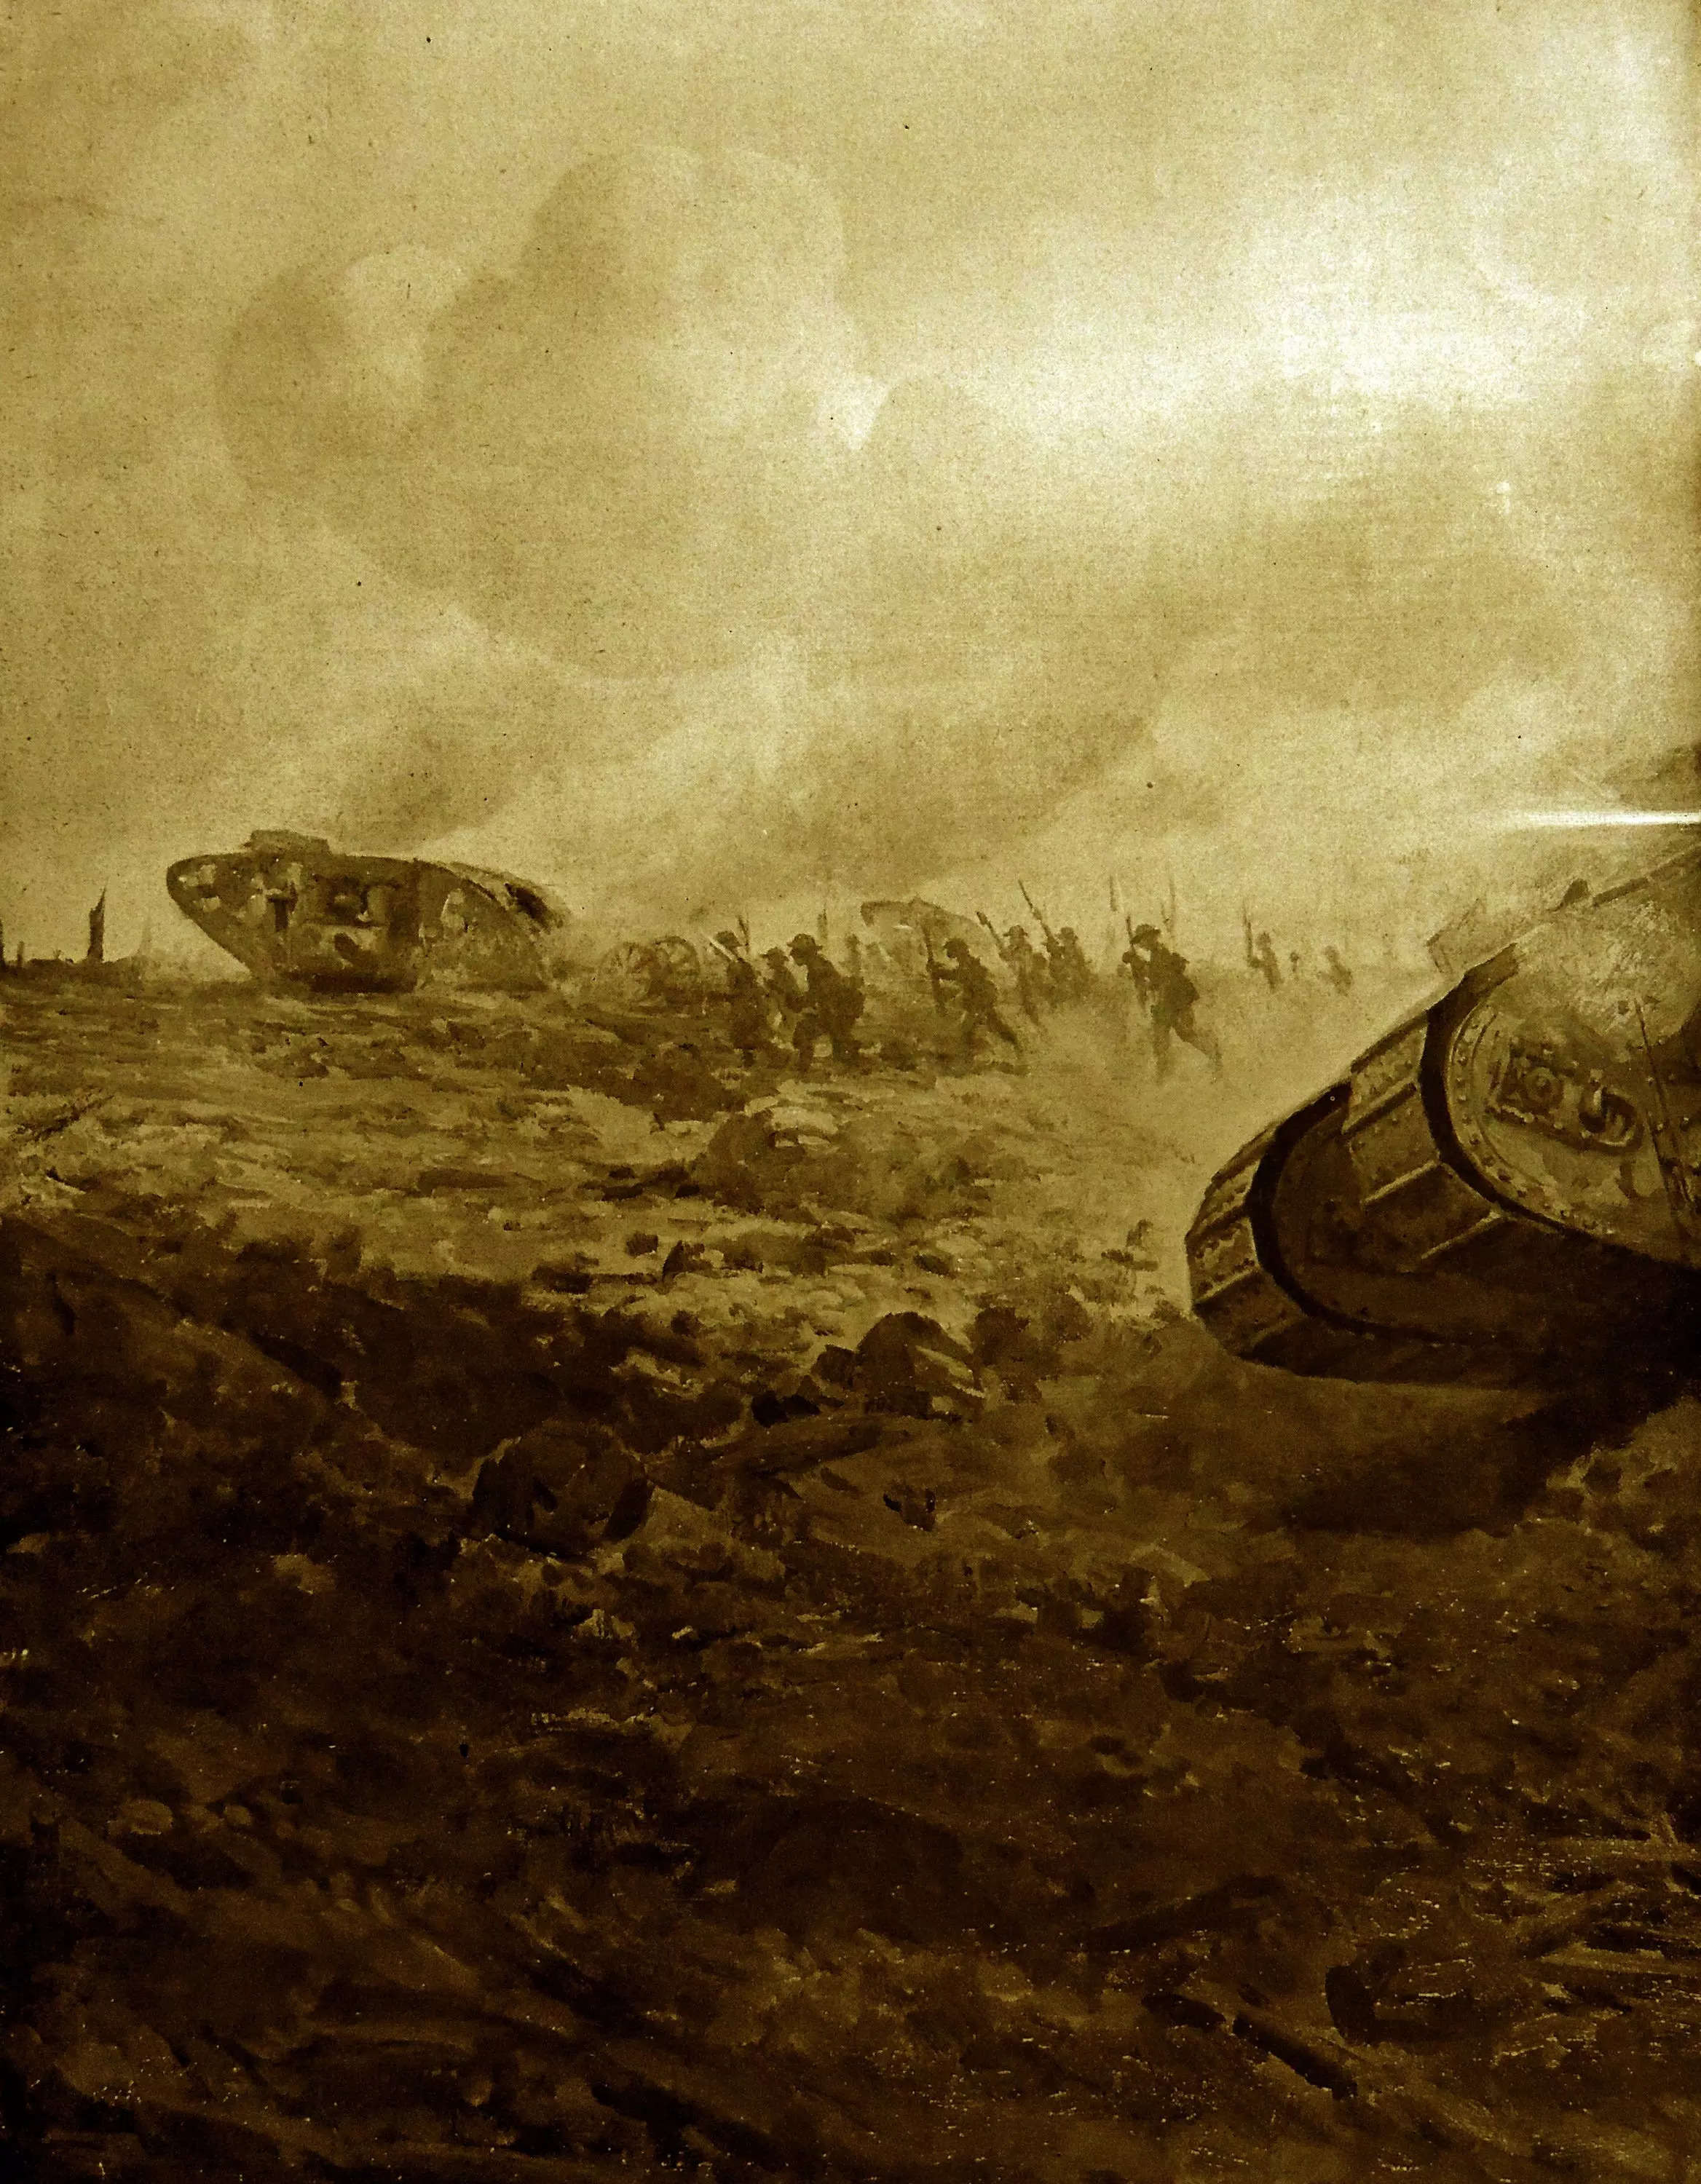 two tanks are seen among soldiers on a sepia battlefield